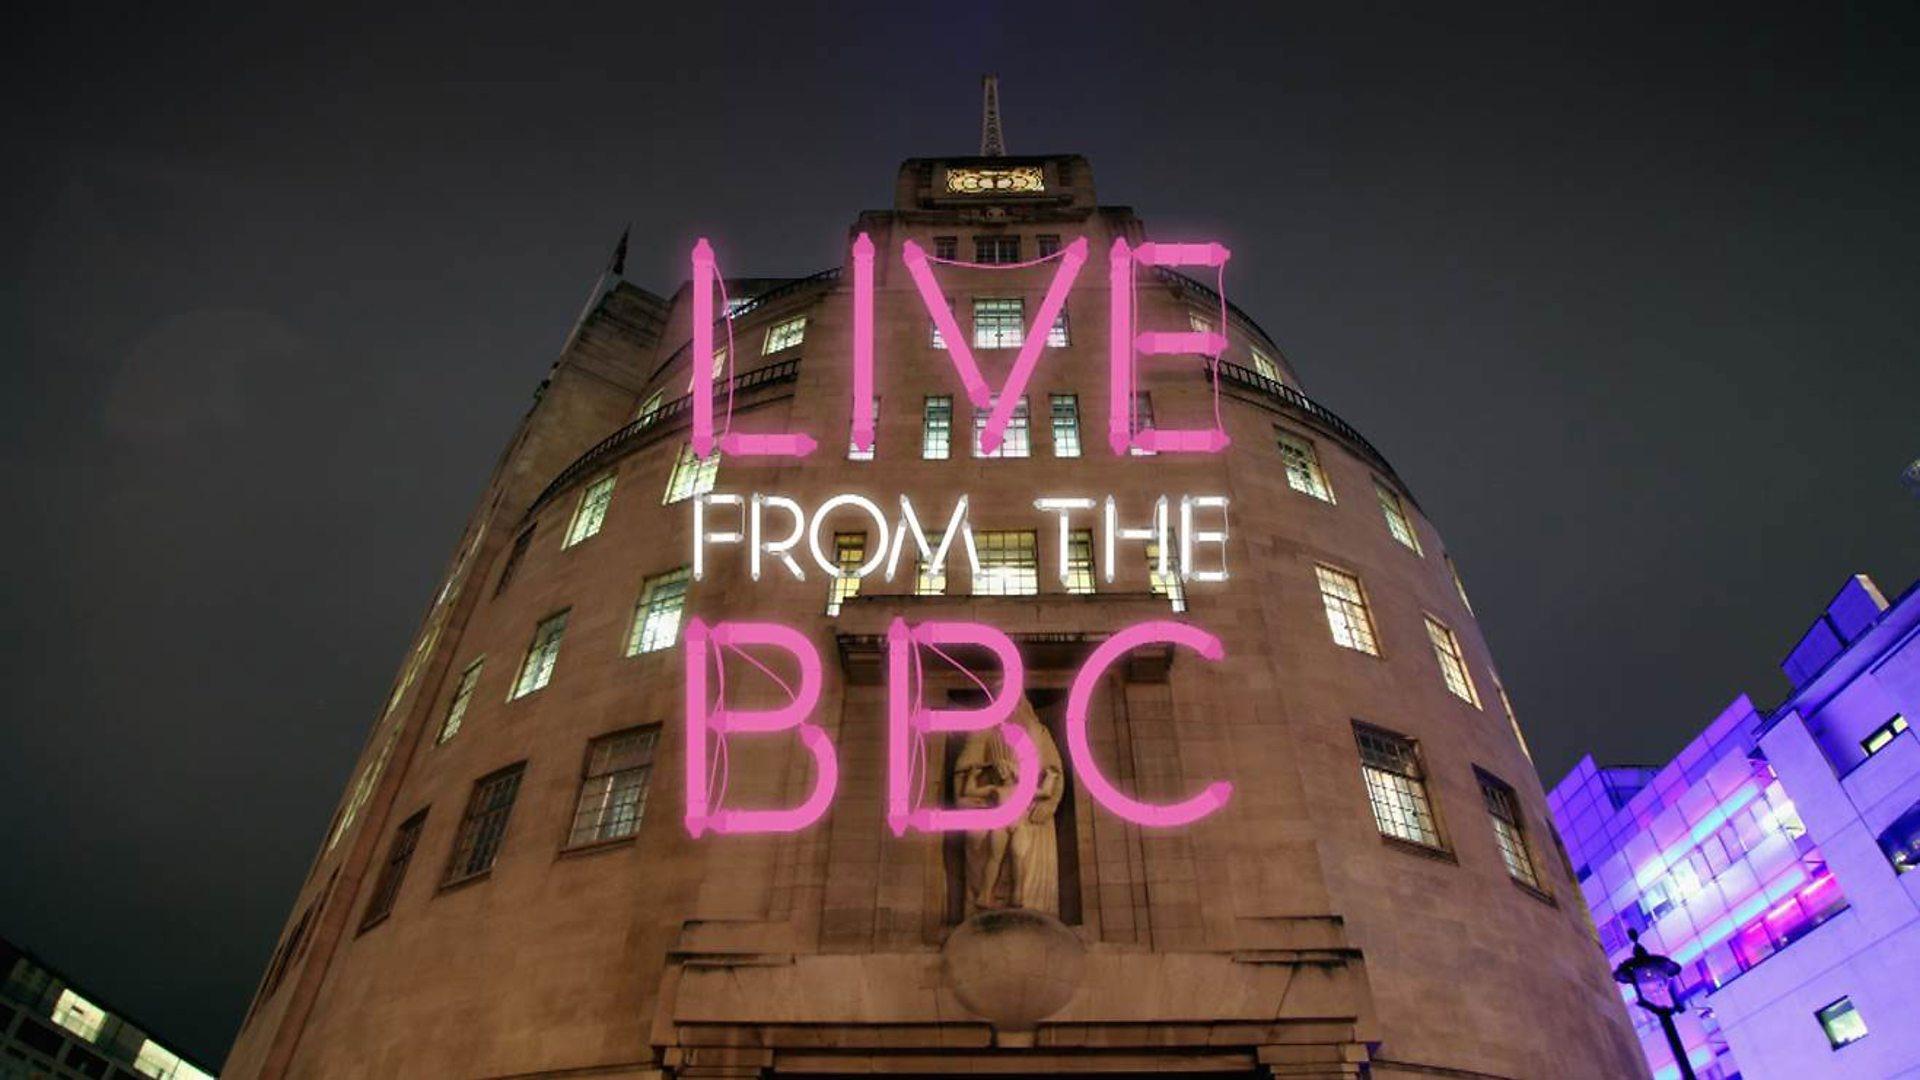 Live from the BBC